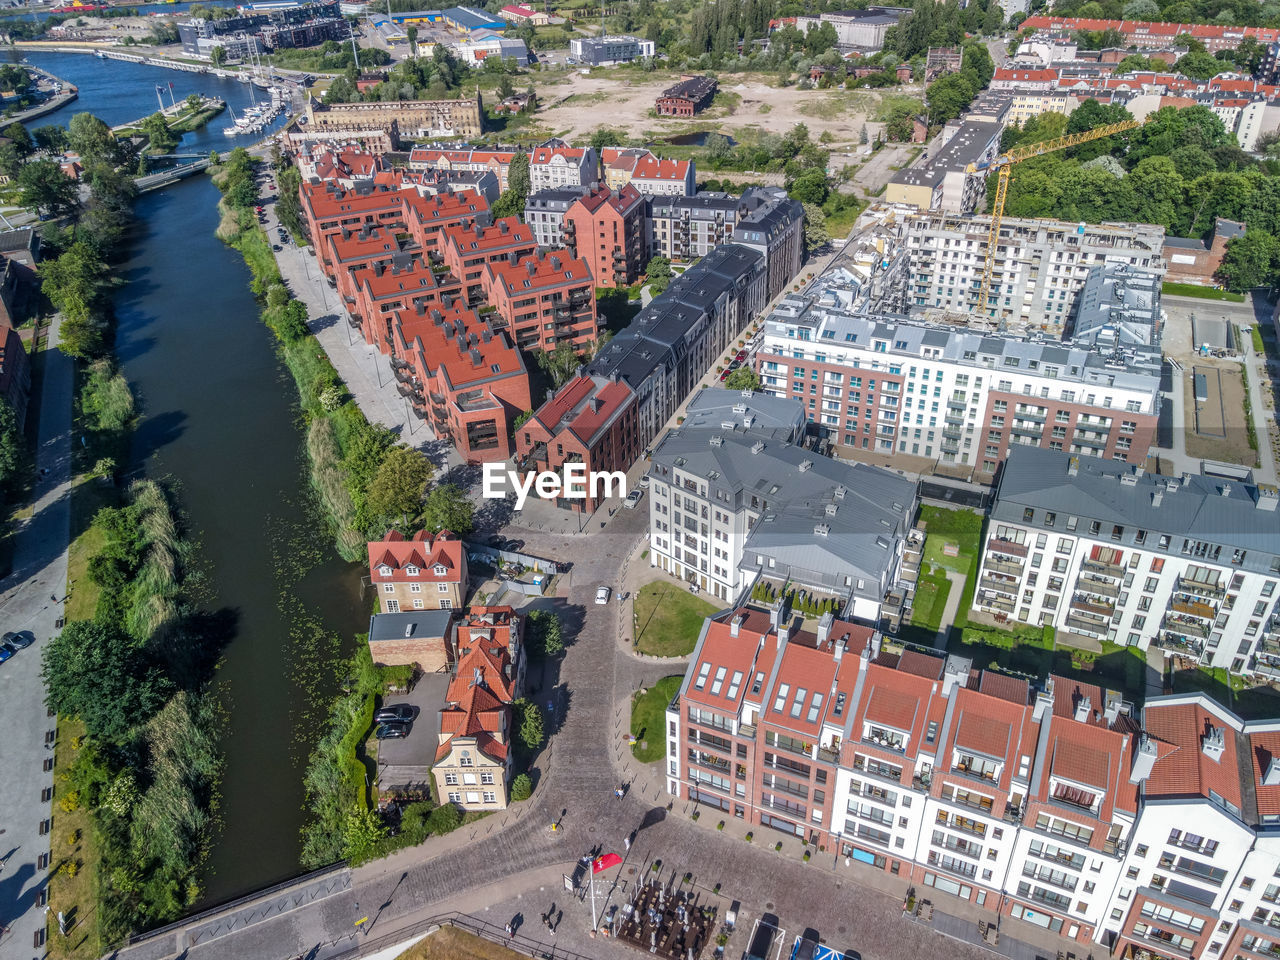 High angle view of street amidst buildings in town, aerial view on new apartments in gdansk, poland